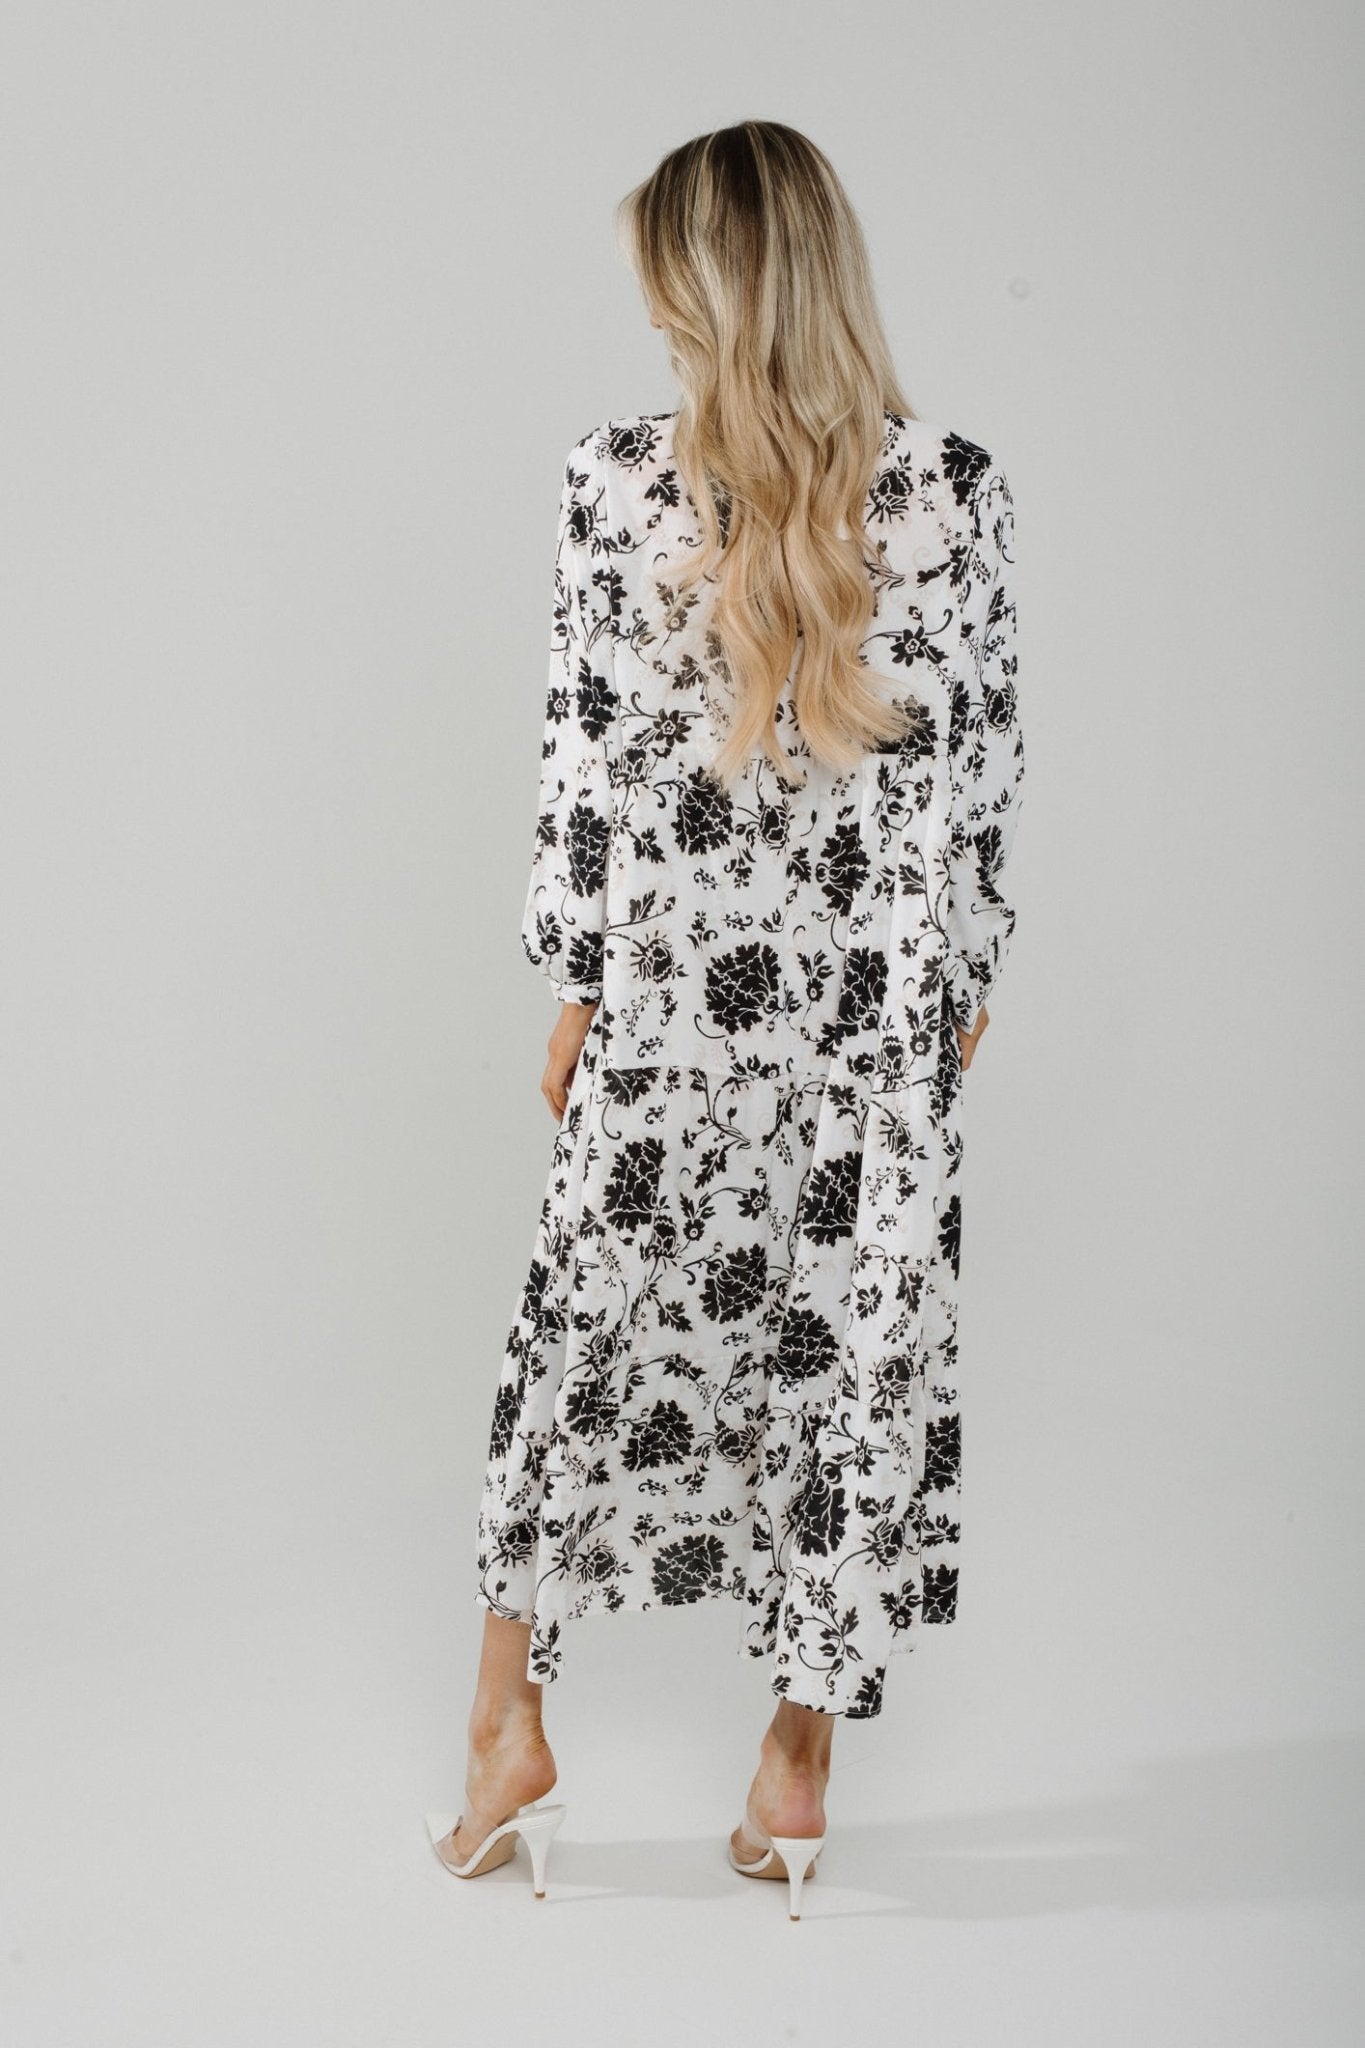 Polly Tiered Dress In Black & White - The Walk in Wardrobe